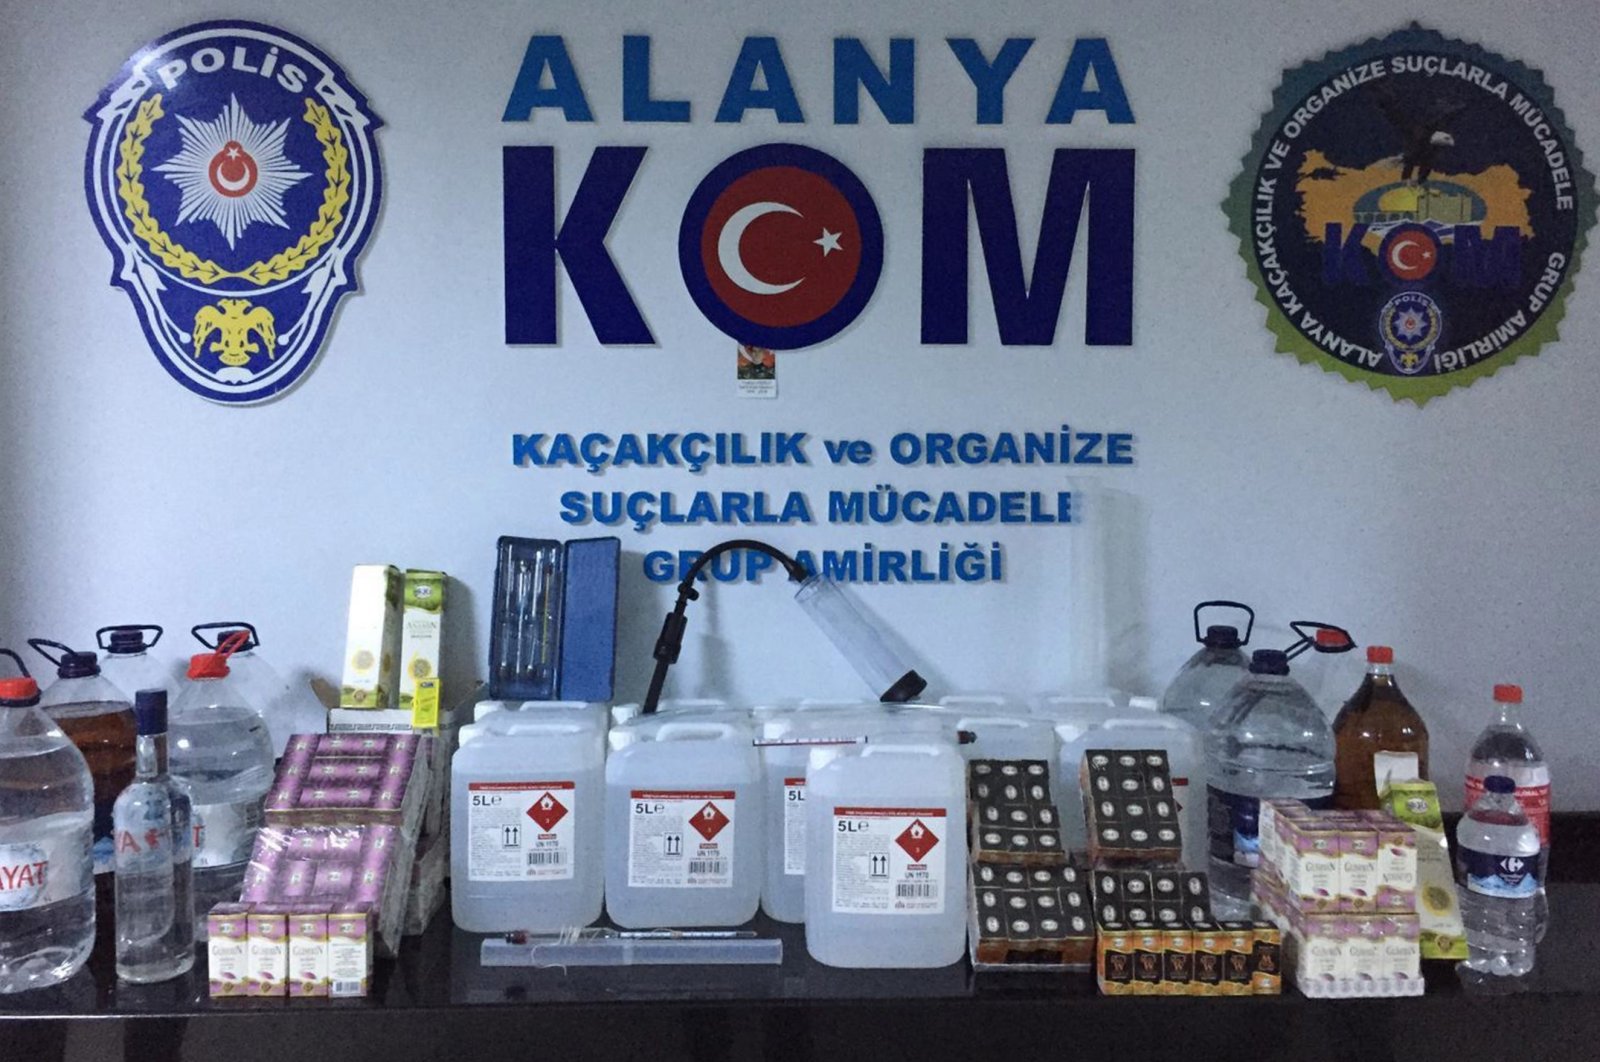 Police forces display seized ingredients and equipment to produce bootleg alcohol, in Antalya, Turkey, Oct. 8, 2020. (AA Photo) 